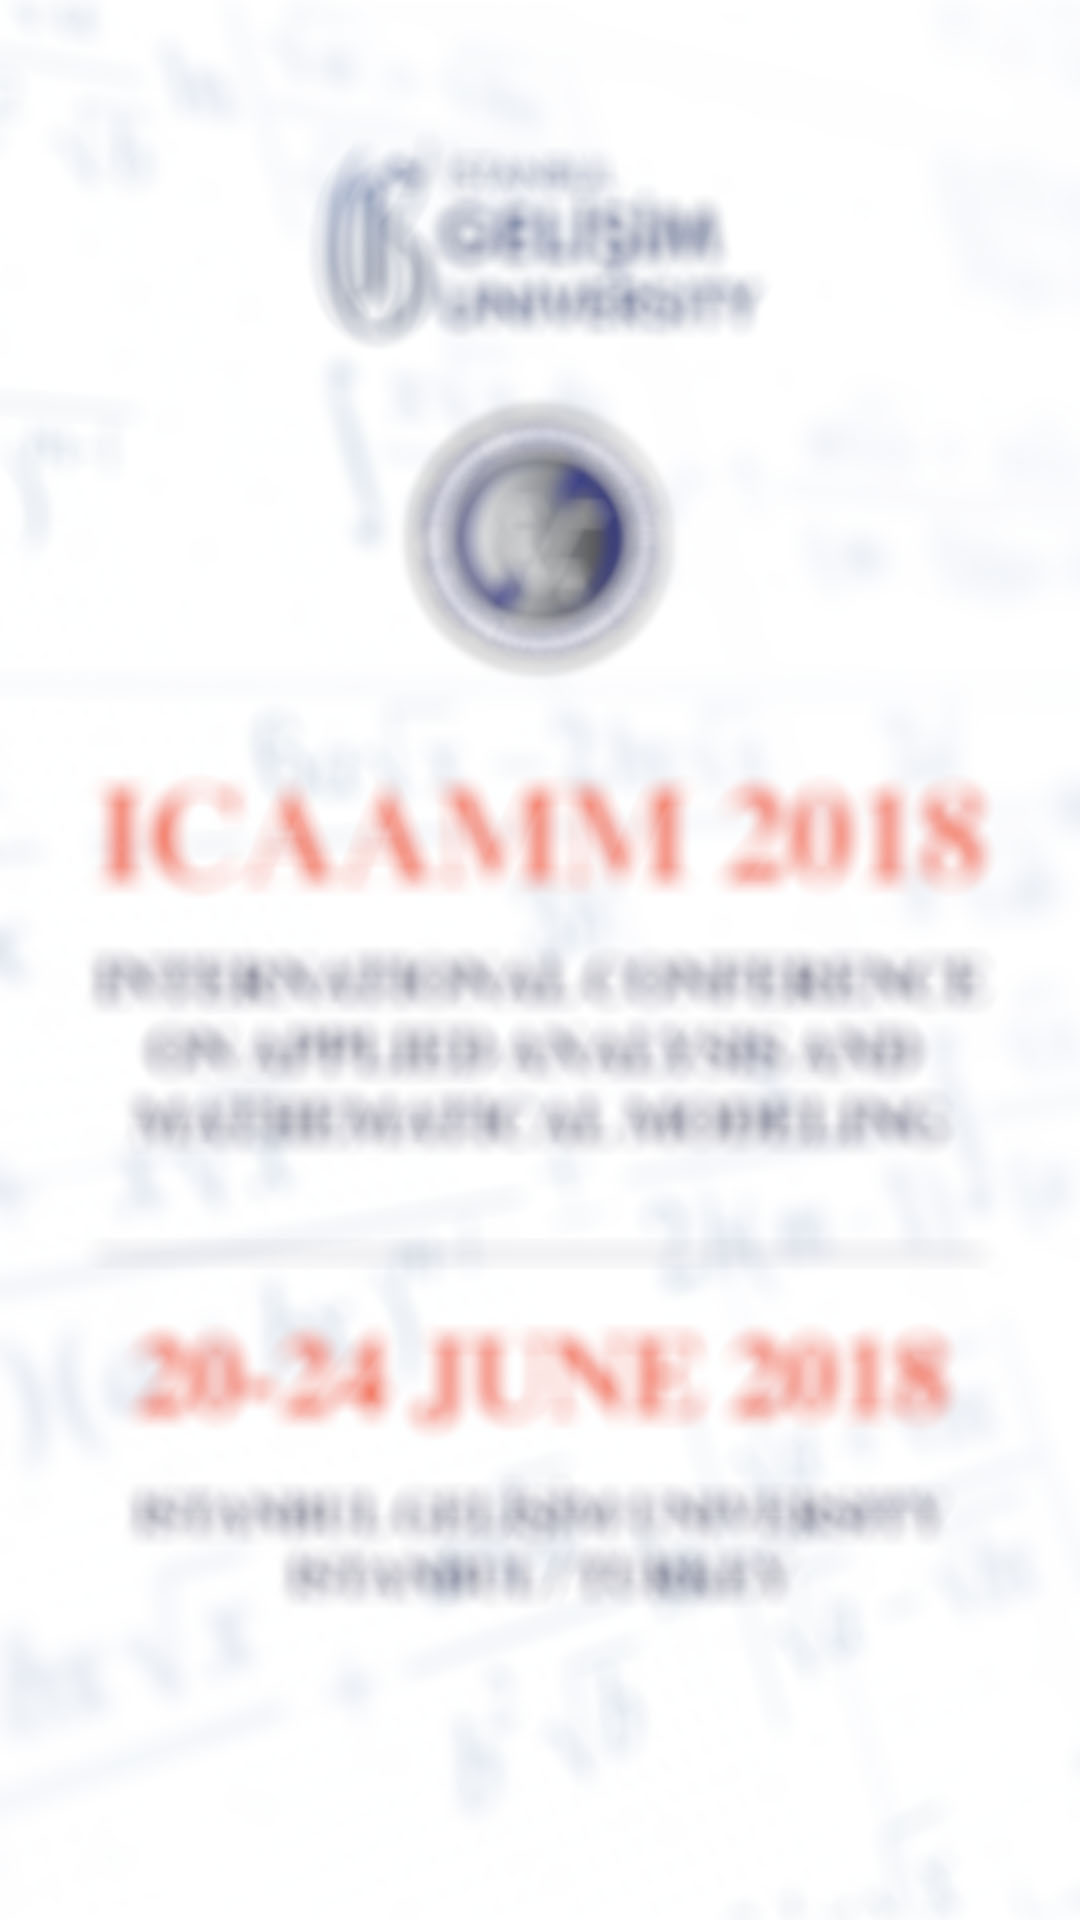 ICAAMM 2018 